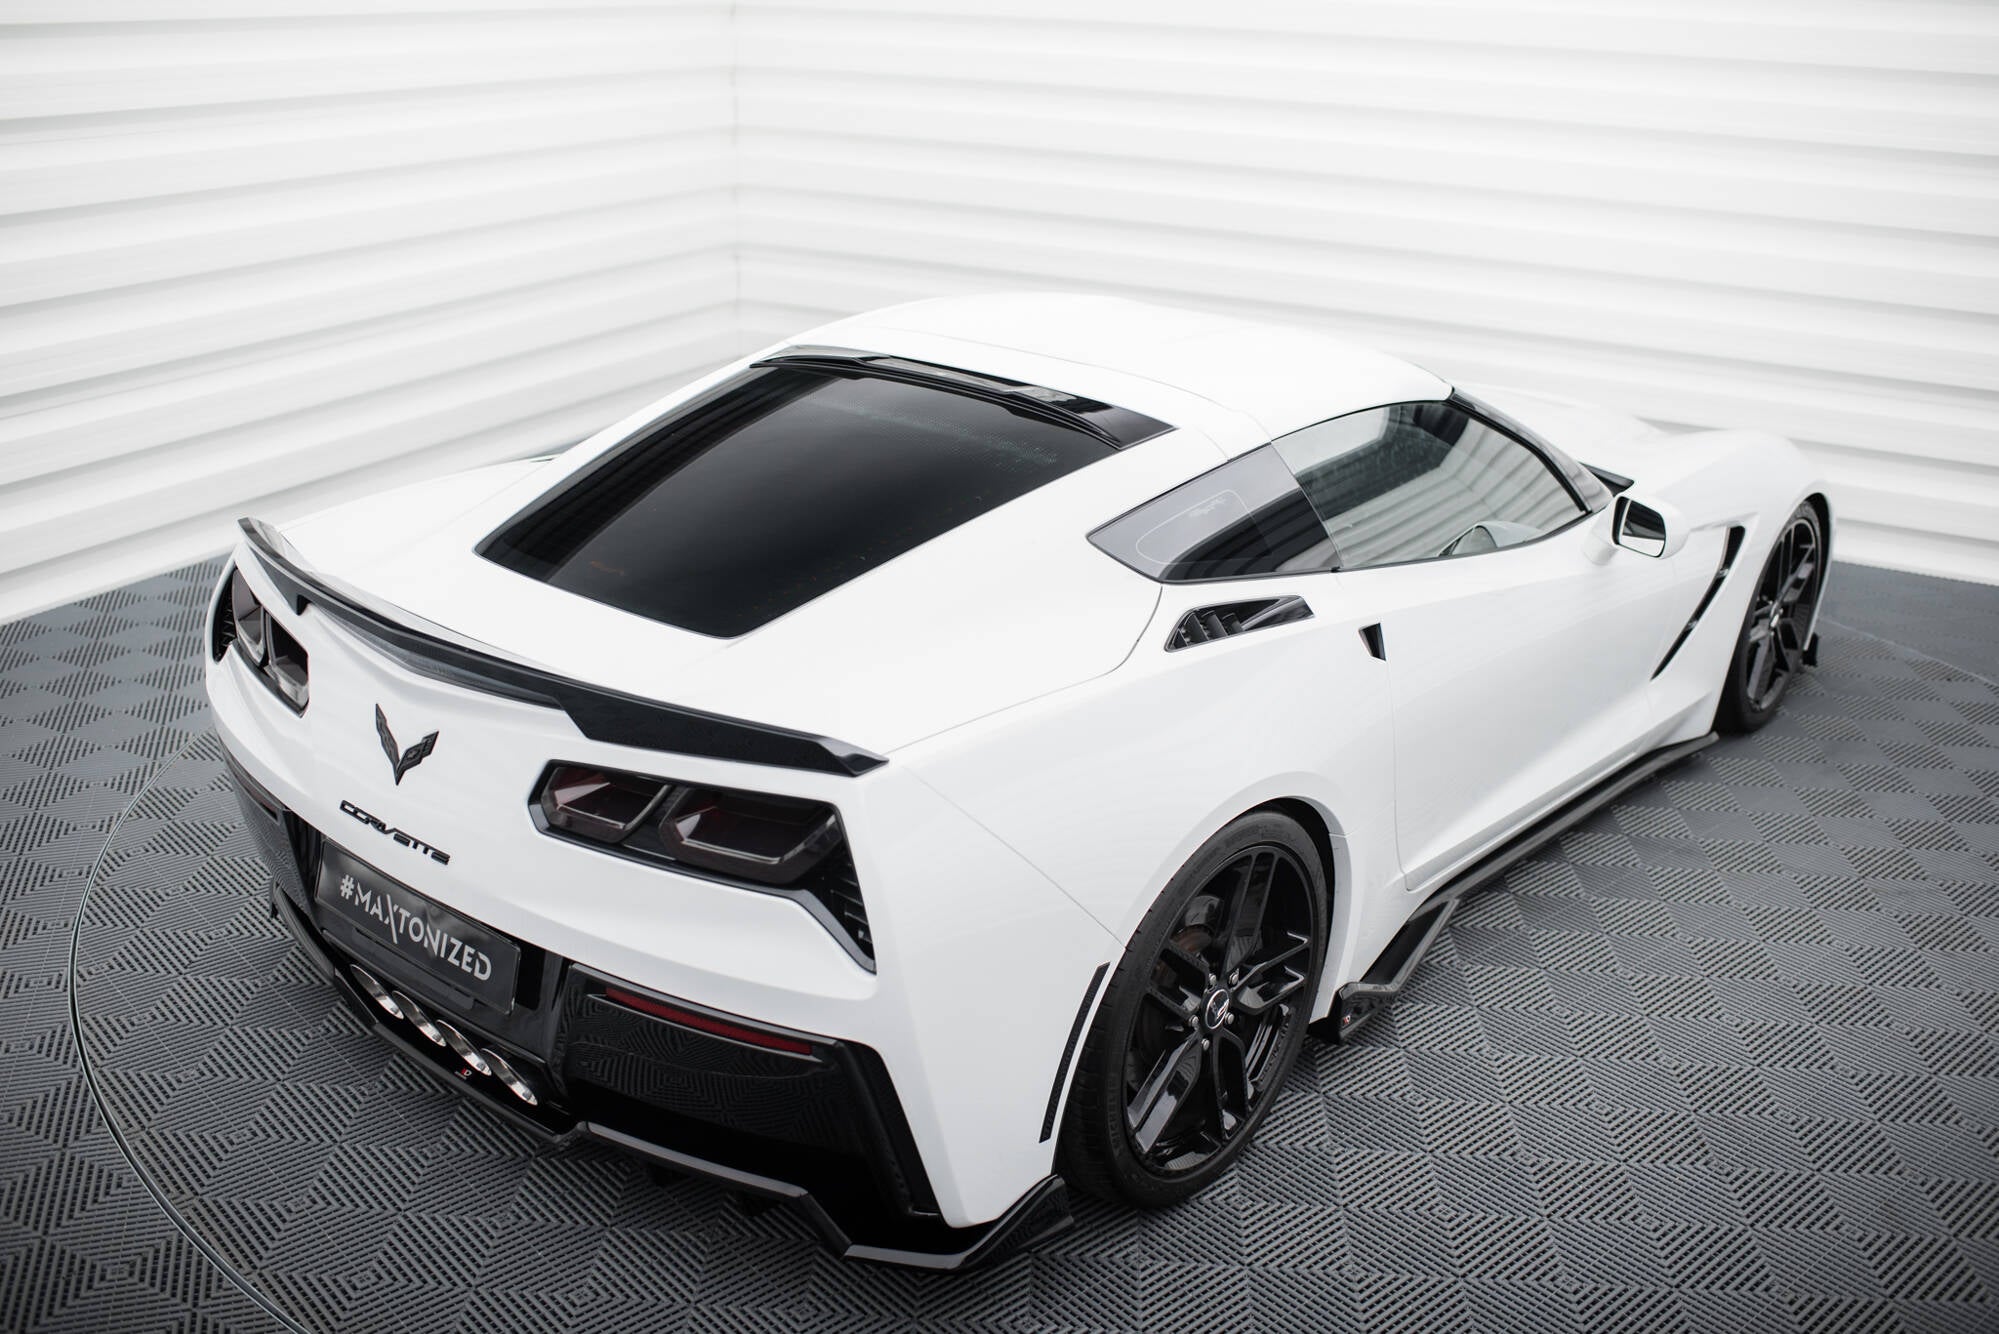 The extension of the rear window Chevrolet Corvette C7